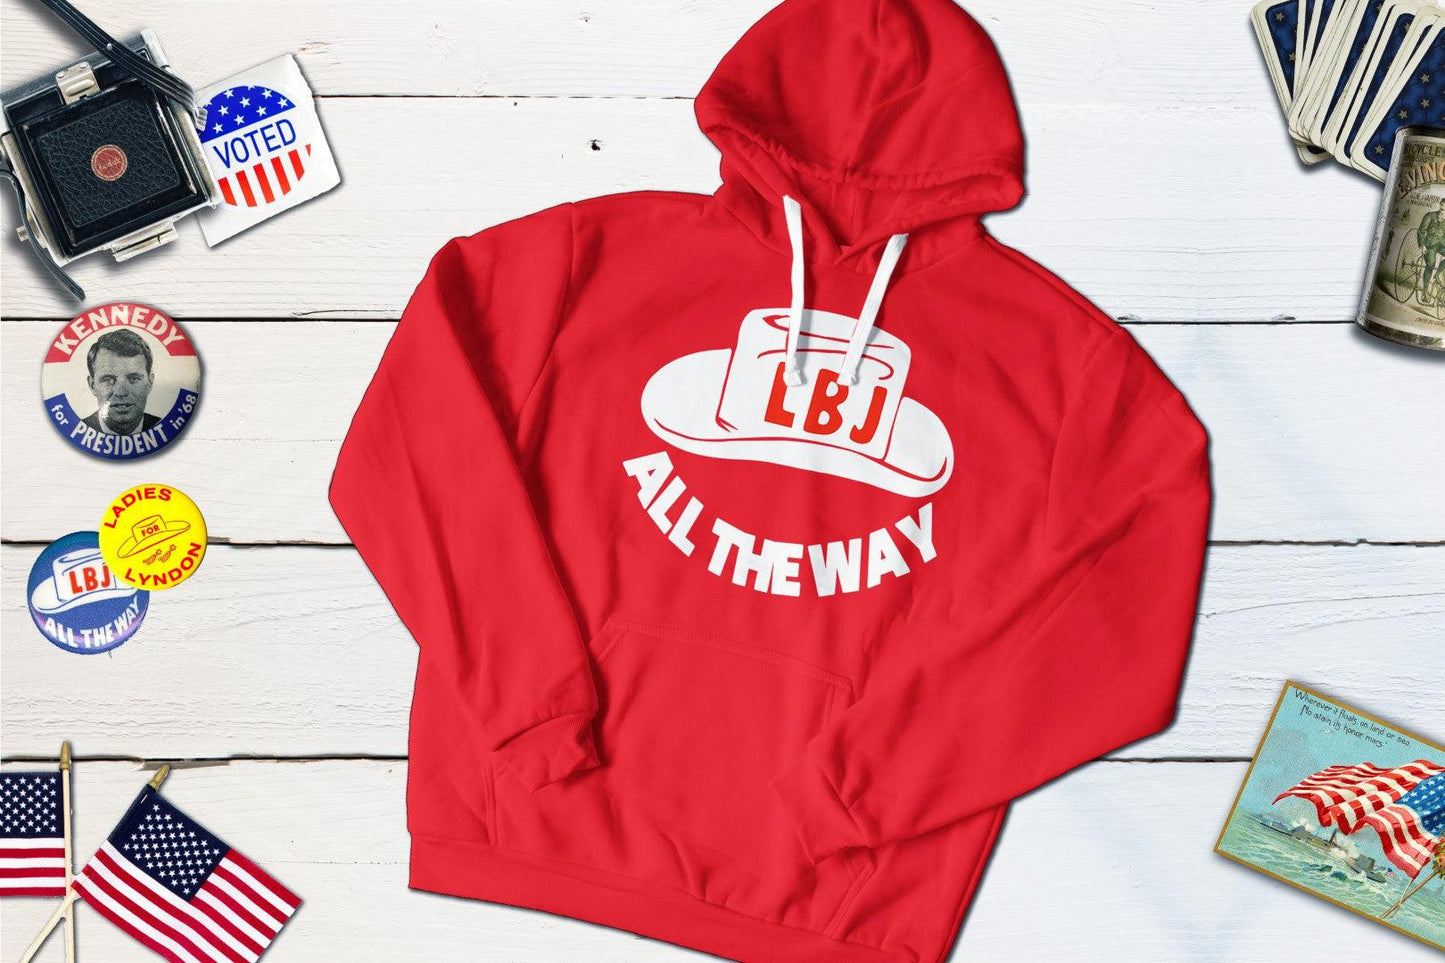 All The Way With LBJ - Political Campaign Button For Lyndon B Johnson-Hooded Sweatshirt-Yesteeyear